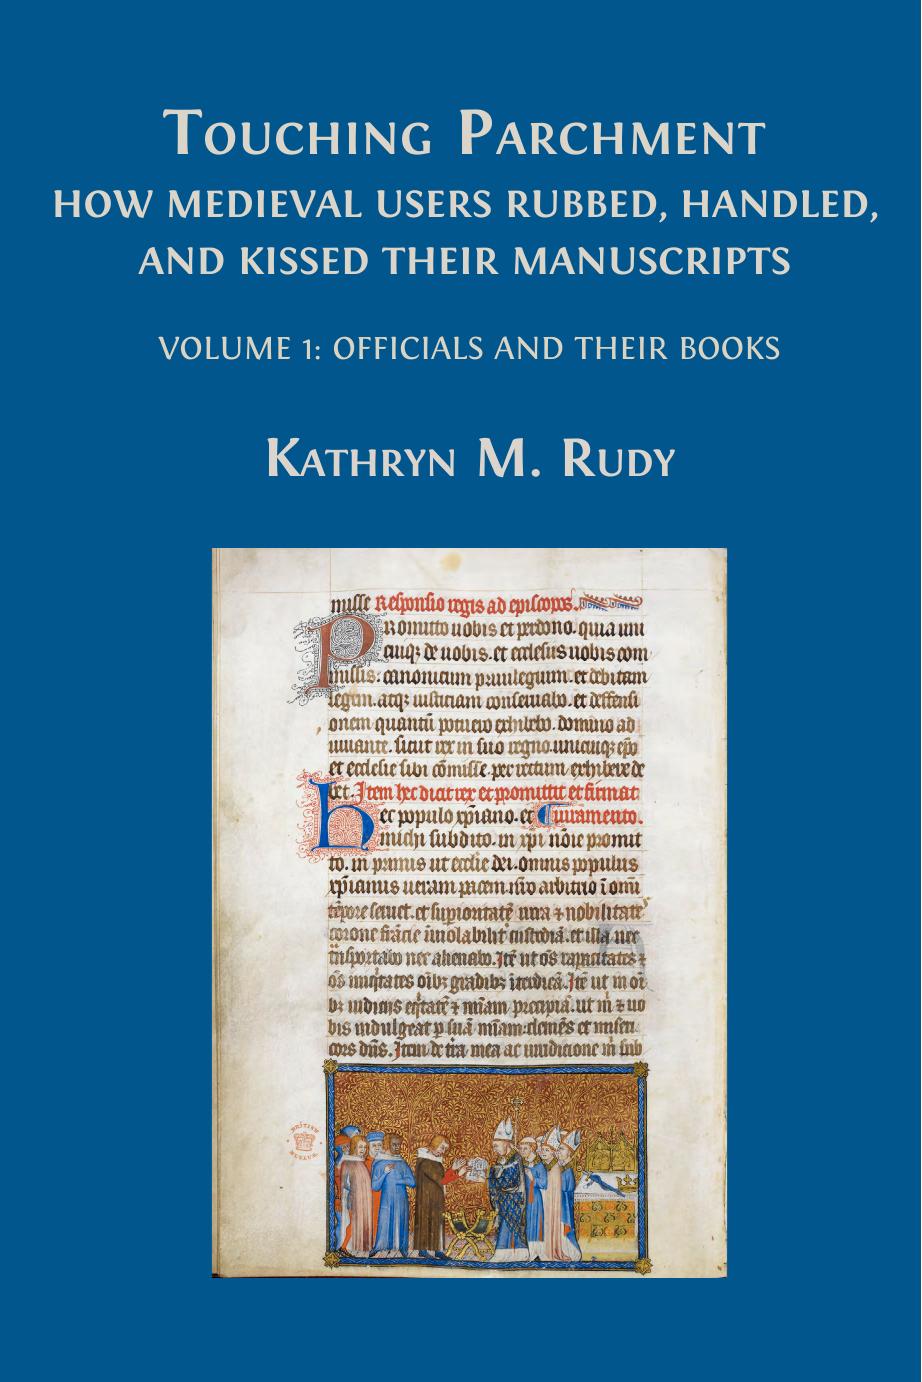 Touching parchment : how medieval users rubbed, handled, and kissed their manuscripts. Volume 1: officials and their books by Kate Rudy